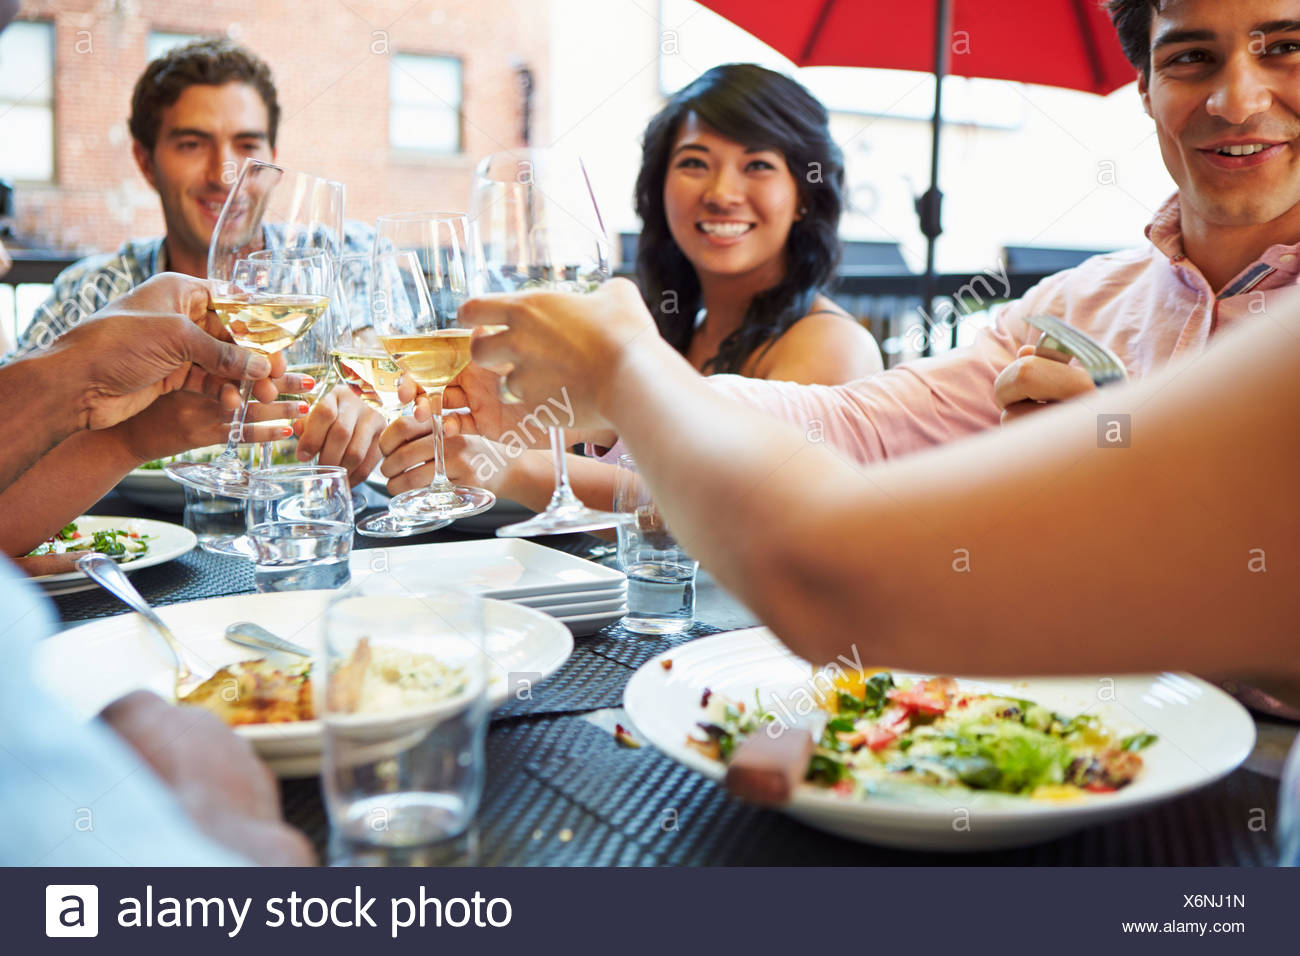 Group Of Friends Eating At A Chinese Restaurant High Resolution Stock  Photography and Images - Alamy